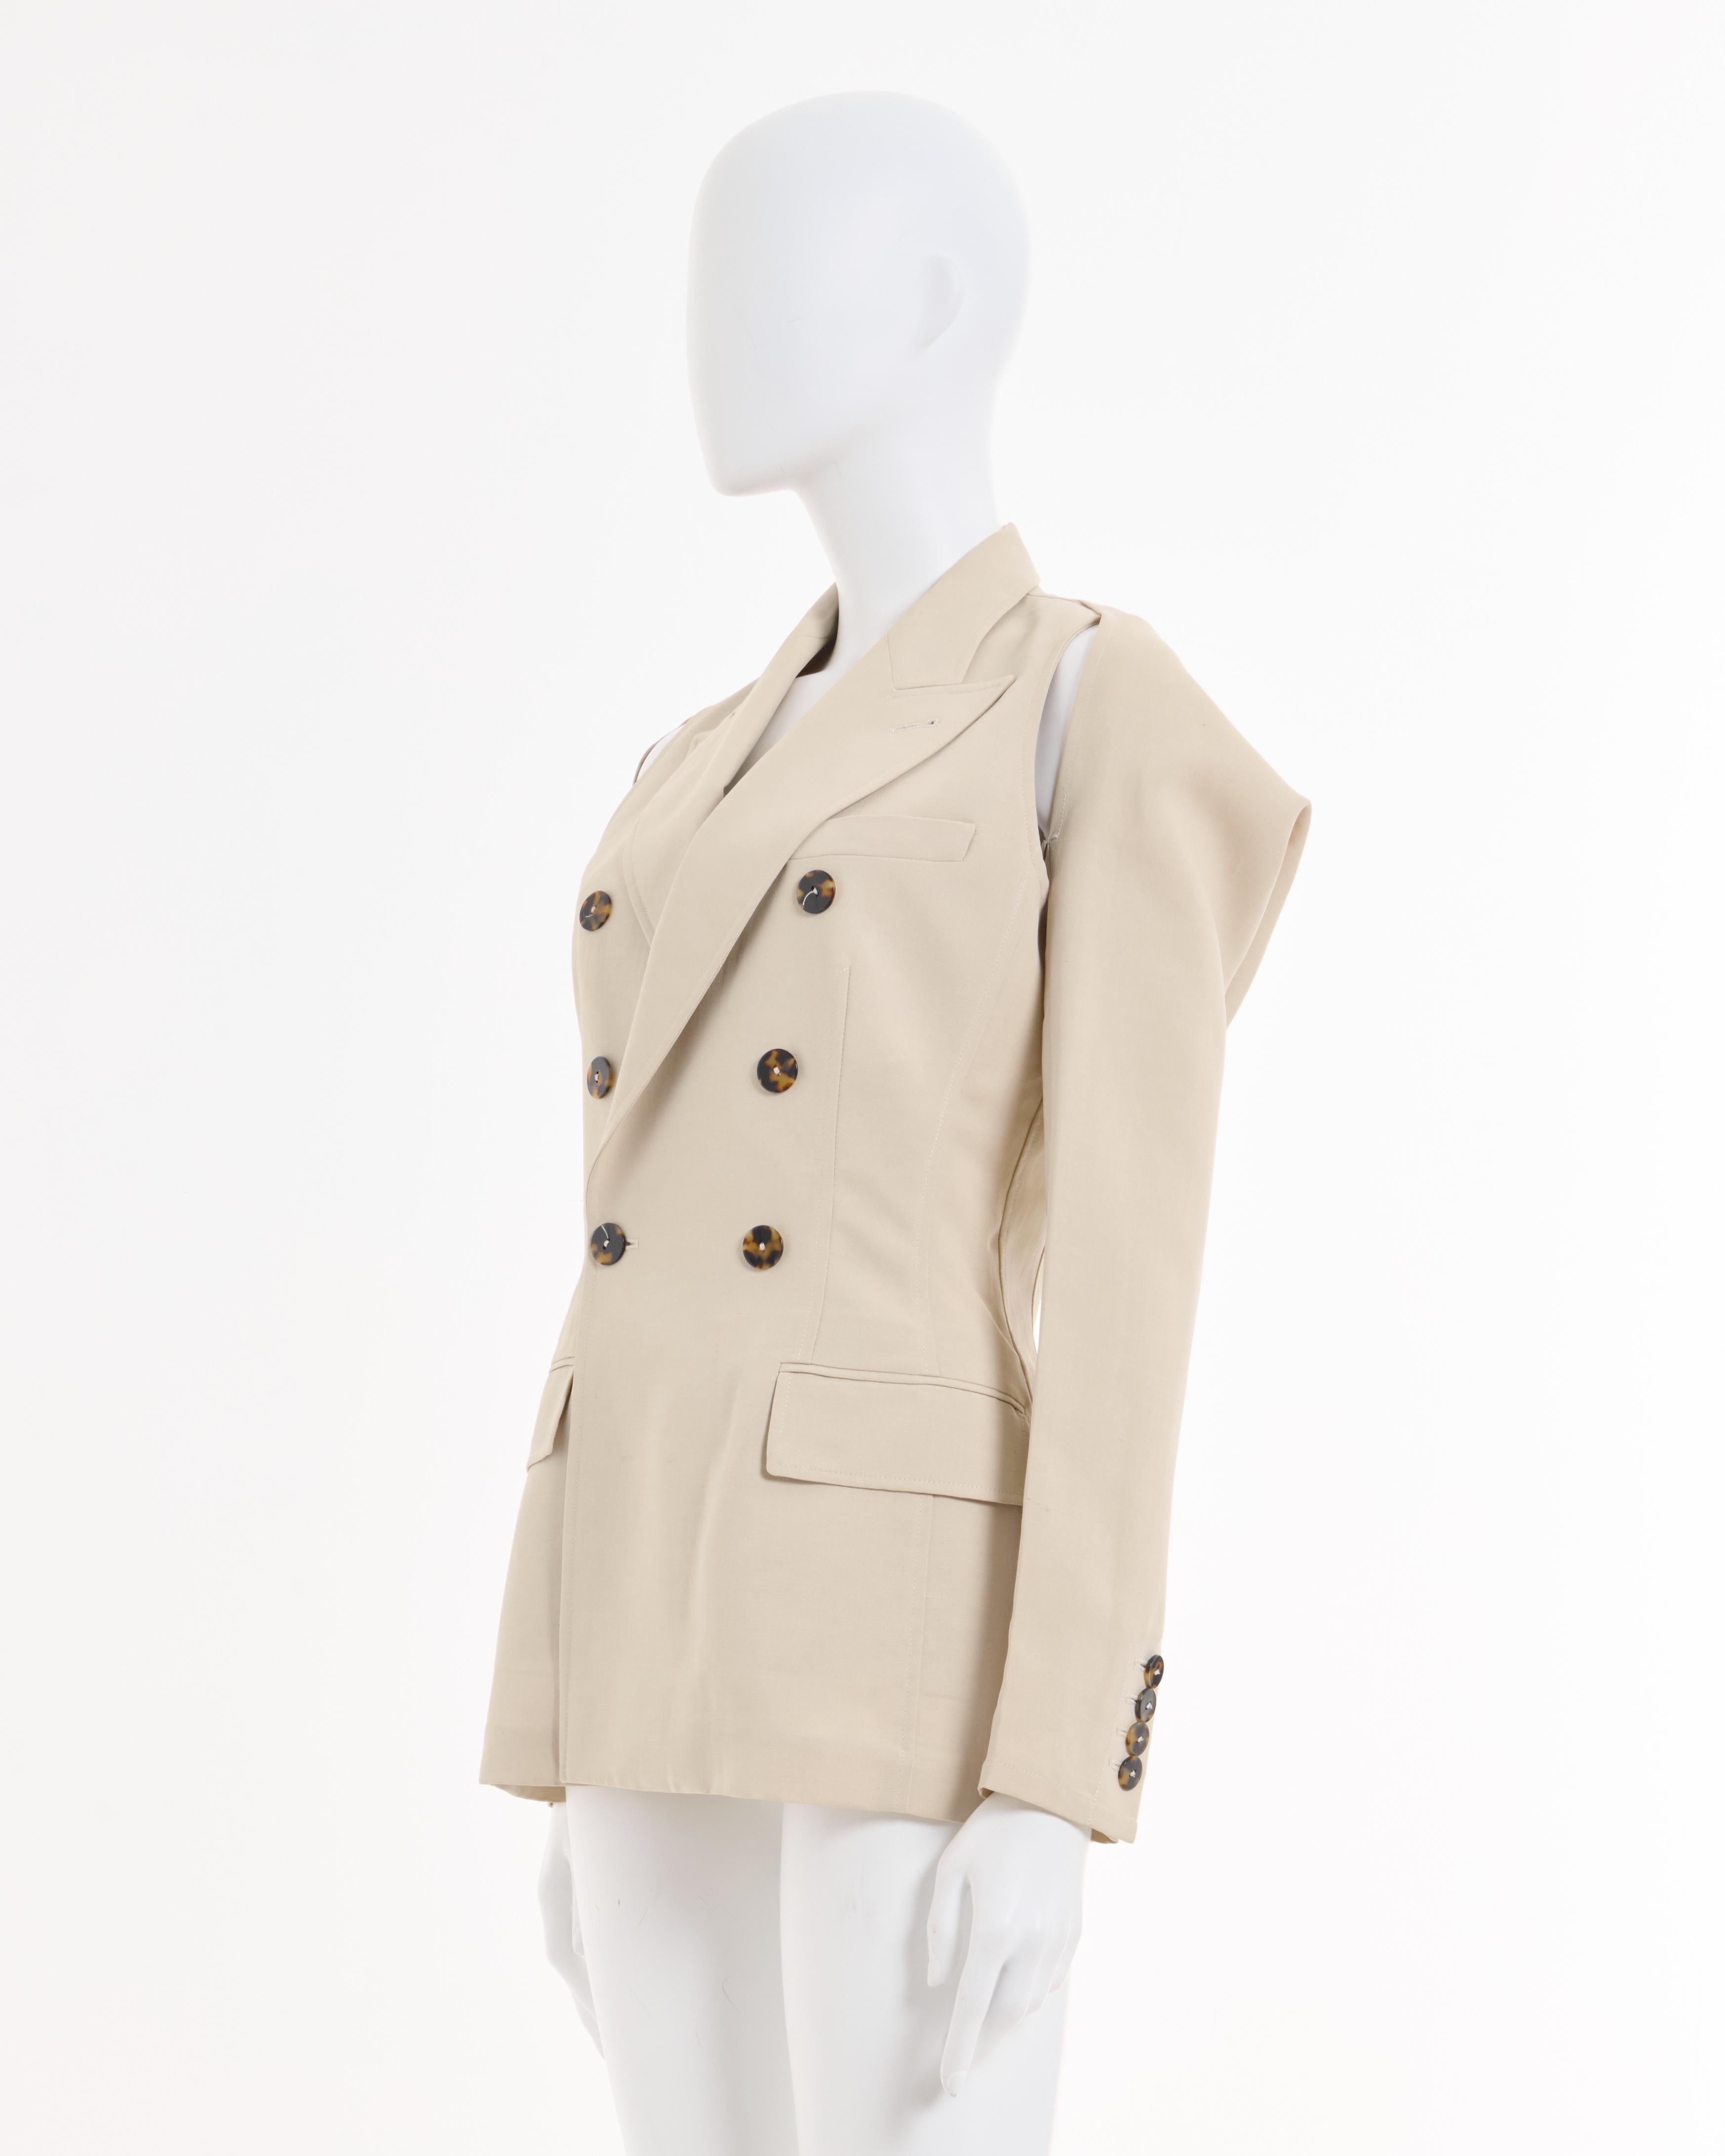 - Archival Jean Paul Gaultier cream double breasted blazer jacket with bolero sleeve-jacket attached with a button on the back 
- Sold by Skof.Archive
- Fall-Winter 1997/98
- Two pieces jacket 
- Two frontal pocket 
- Made in Italy 
- Materials: 52%